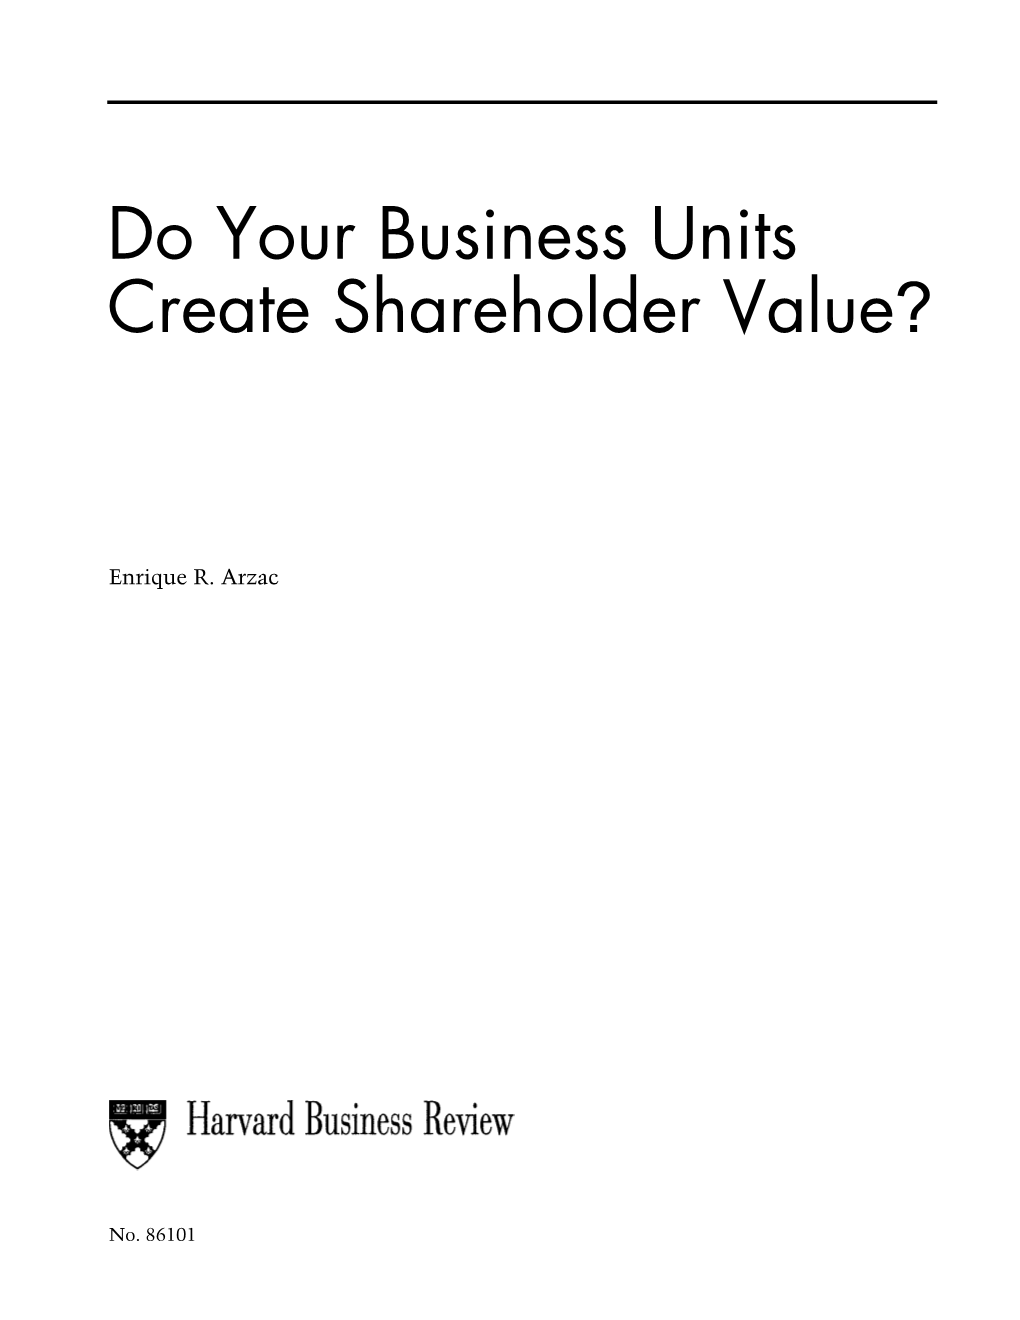 Do Your Business Units Create Shareholder Value?